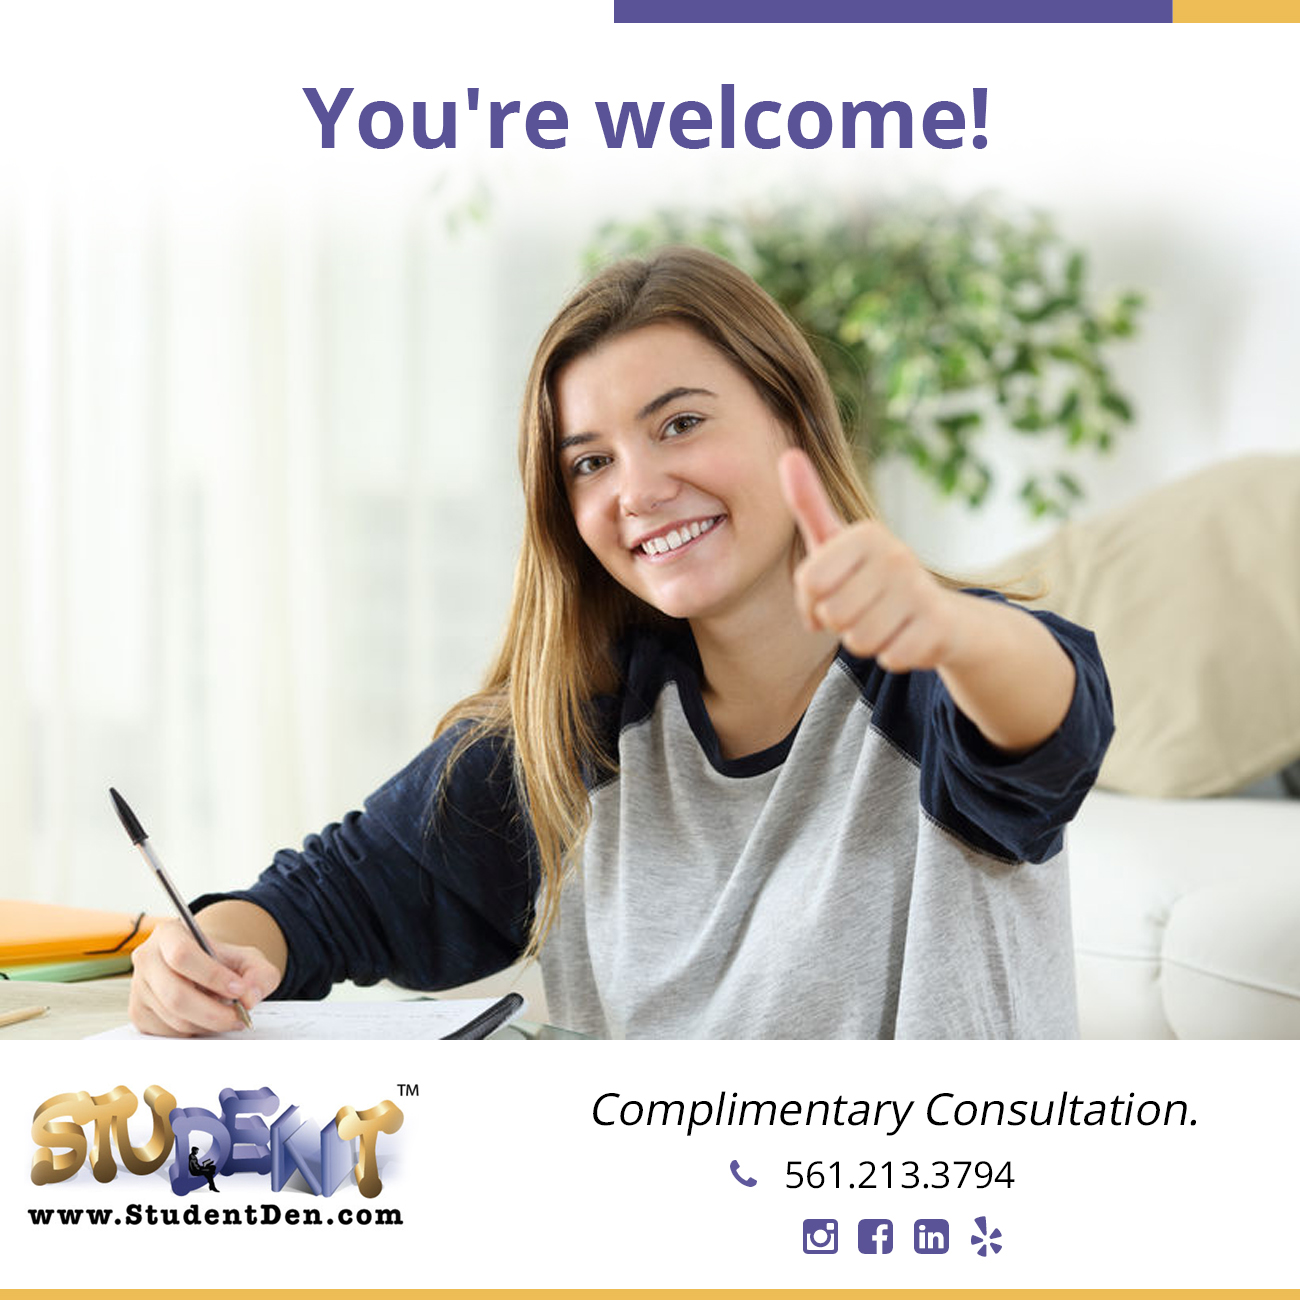 complimentary consultation